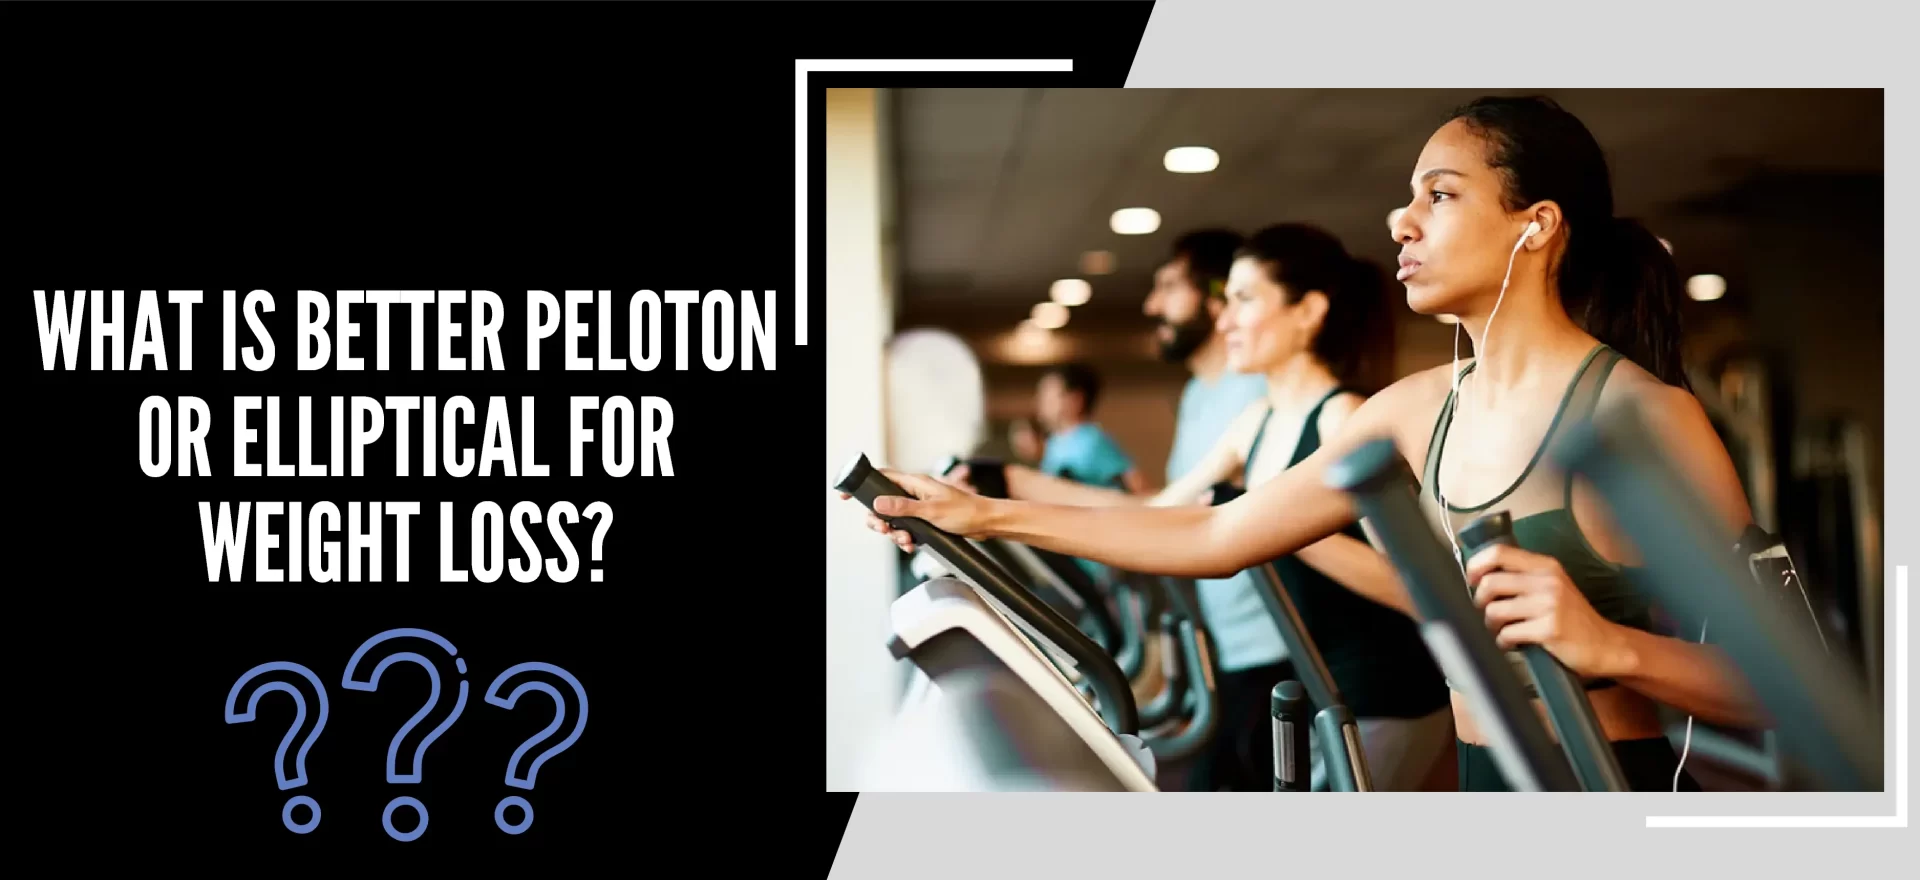 What Is Better Peloton Or Elliptical For Weight Loss?